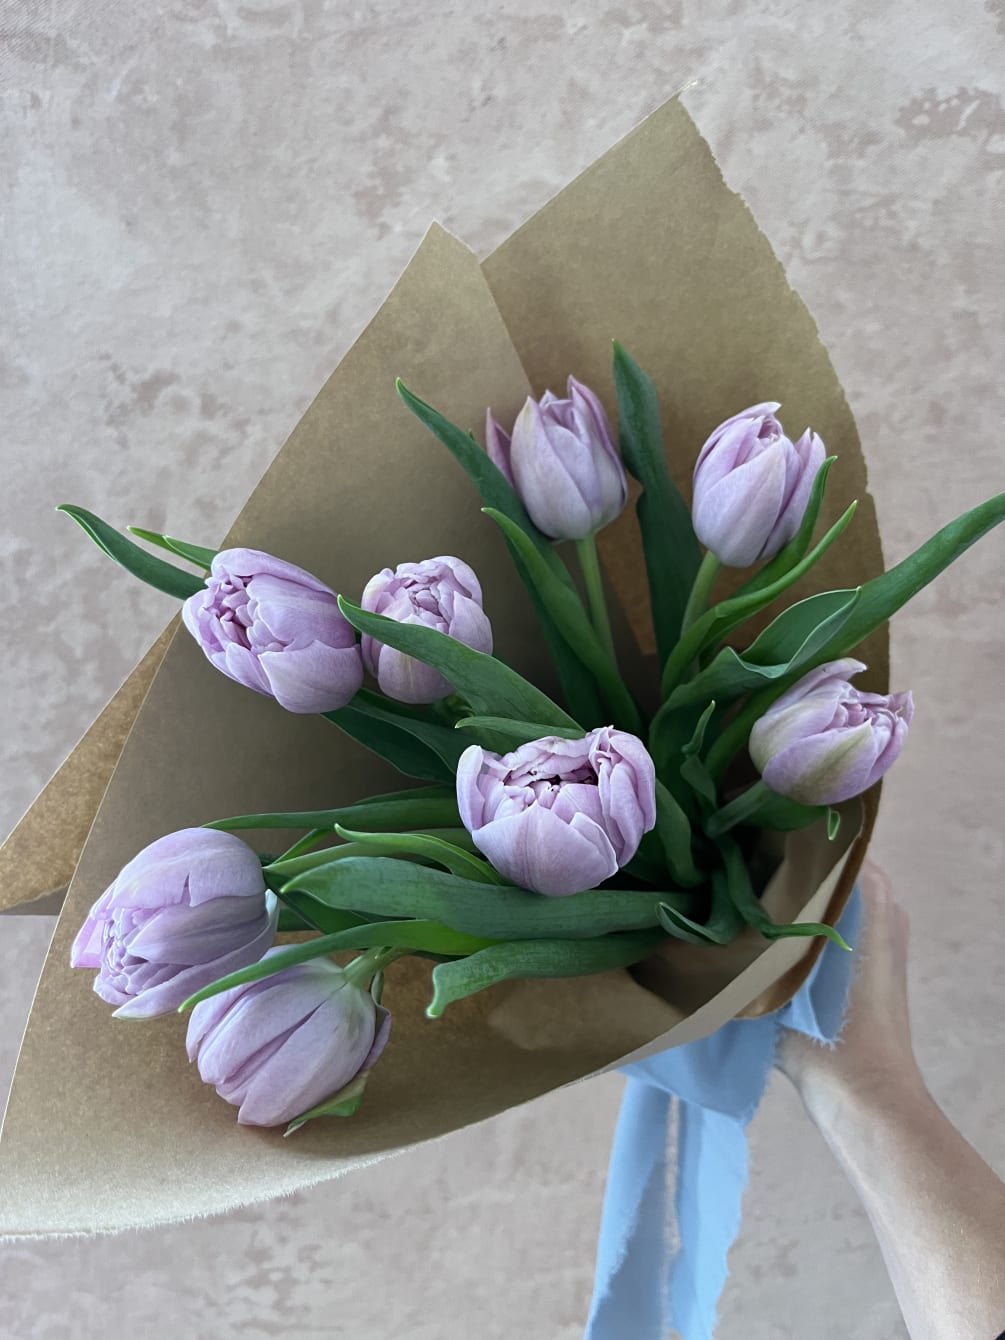 * Standard Tulip Bundle consists of 10 stems and colors are subject